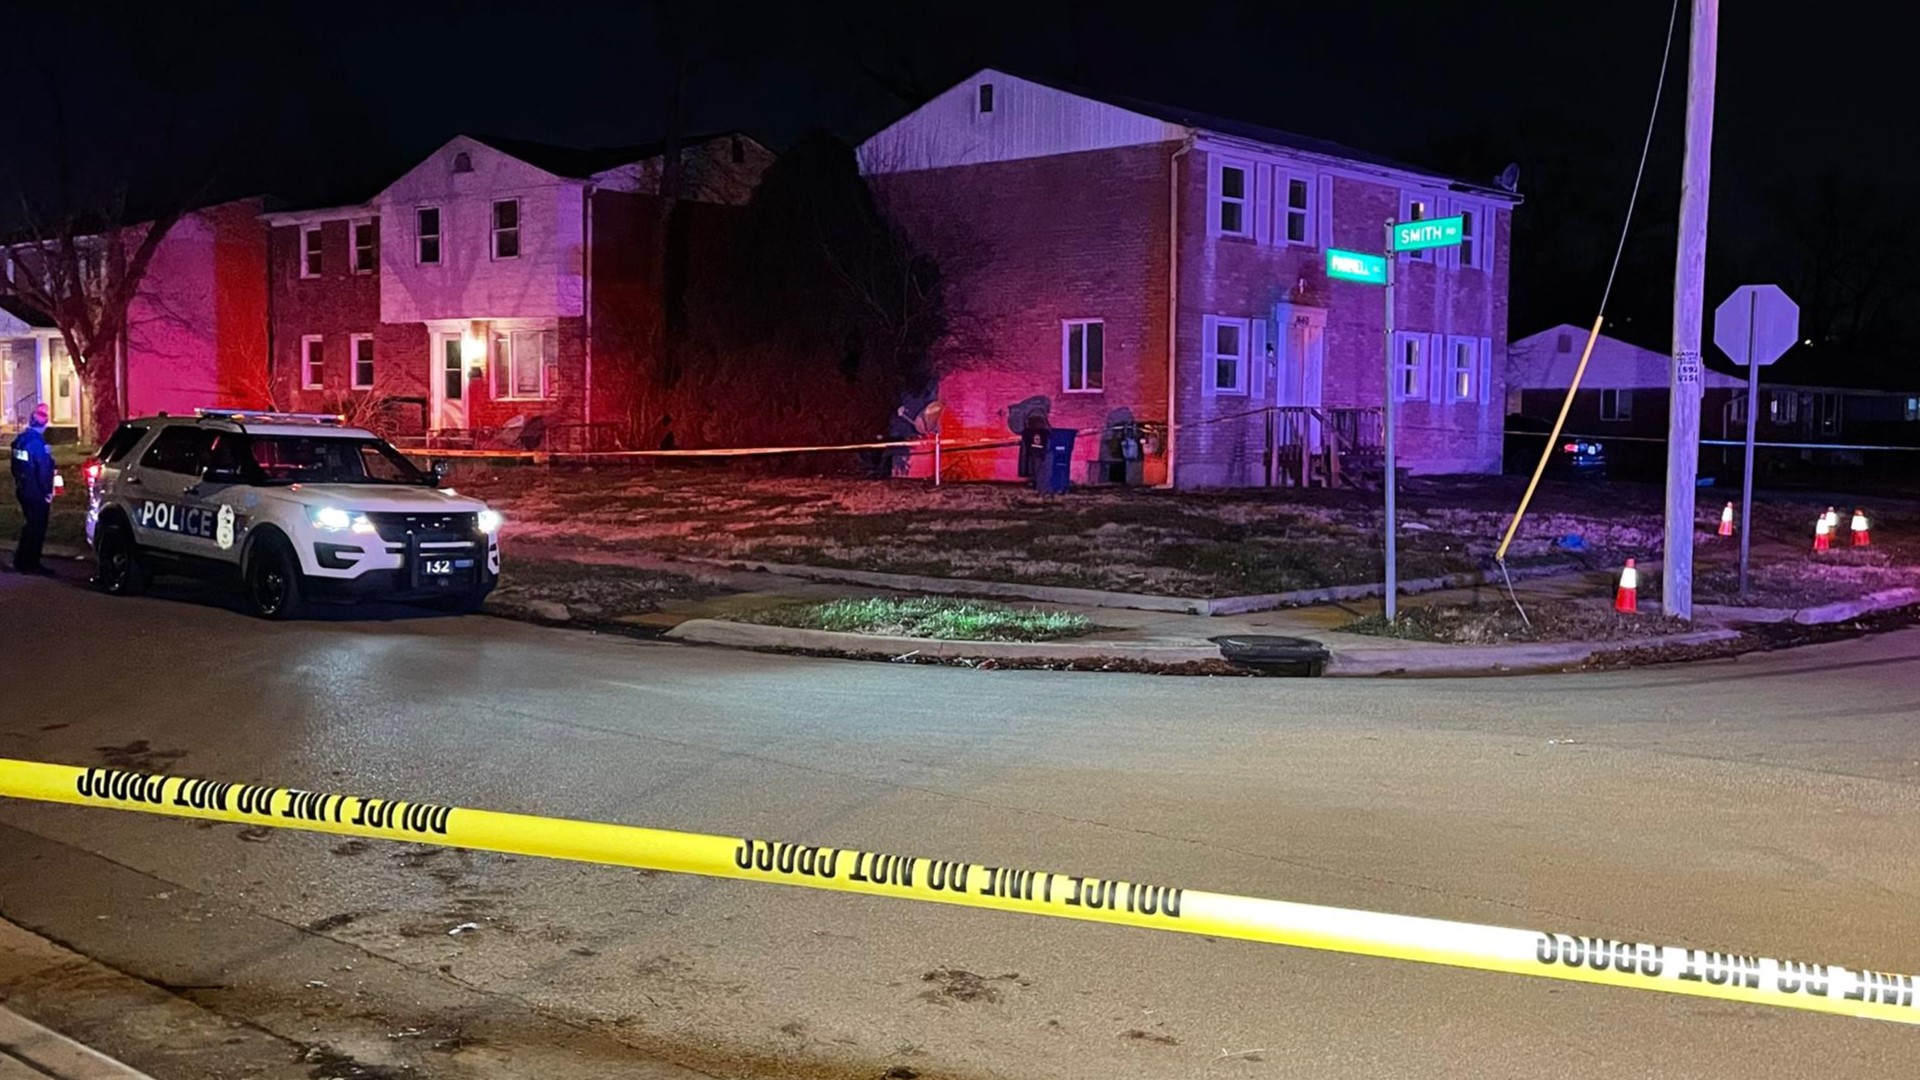 Officers were called to the 1600 block of Smith Road on reports of a shooting around 8:30 p.m.